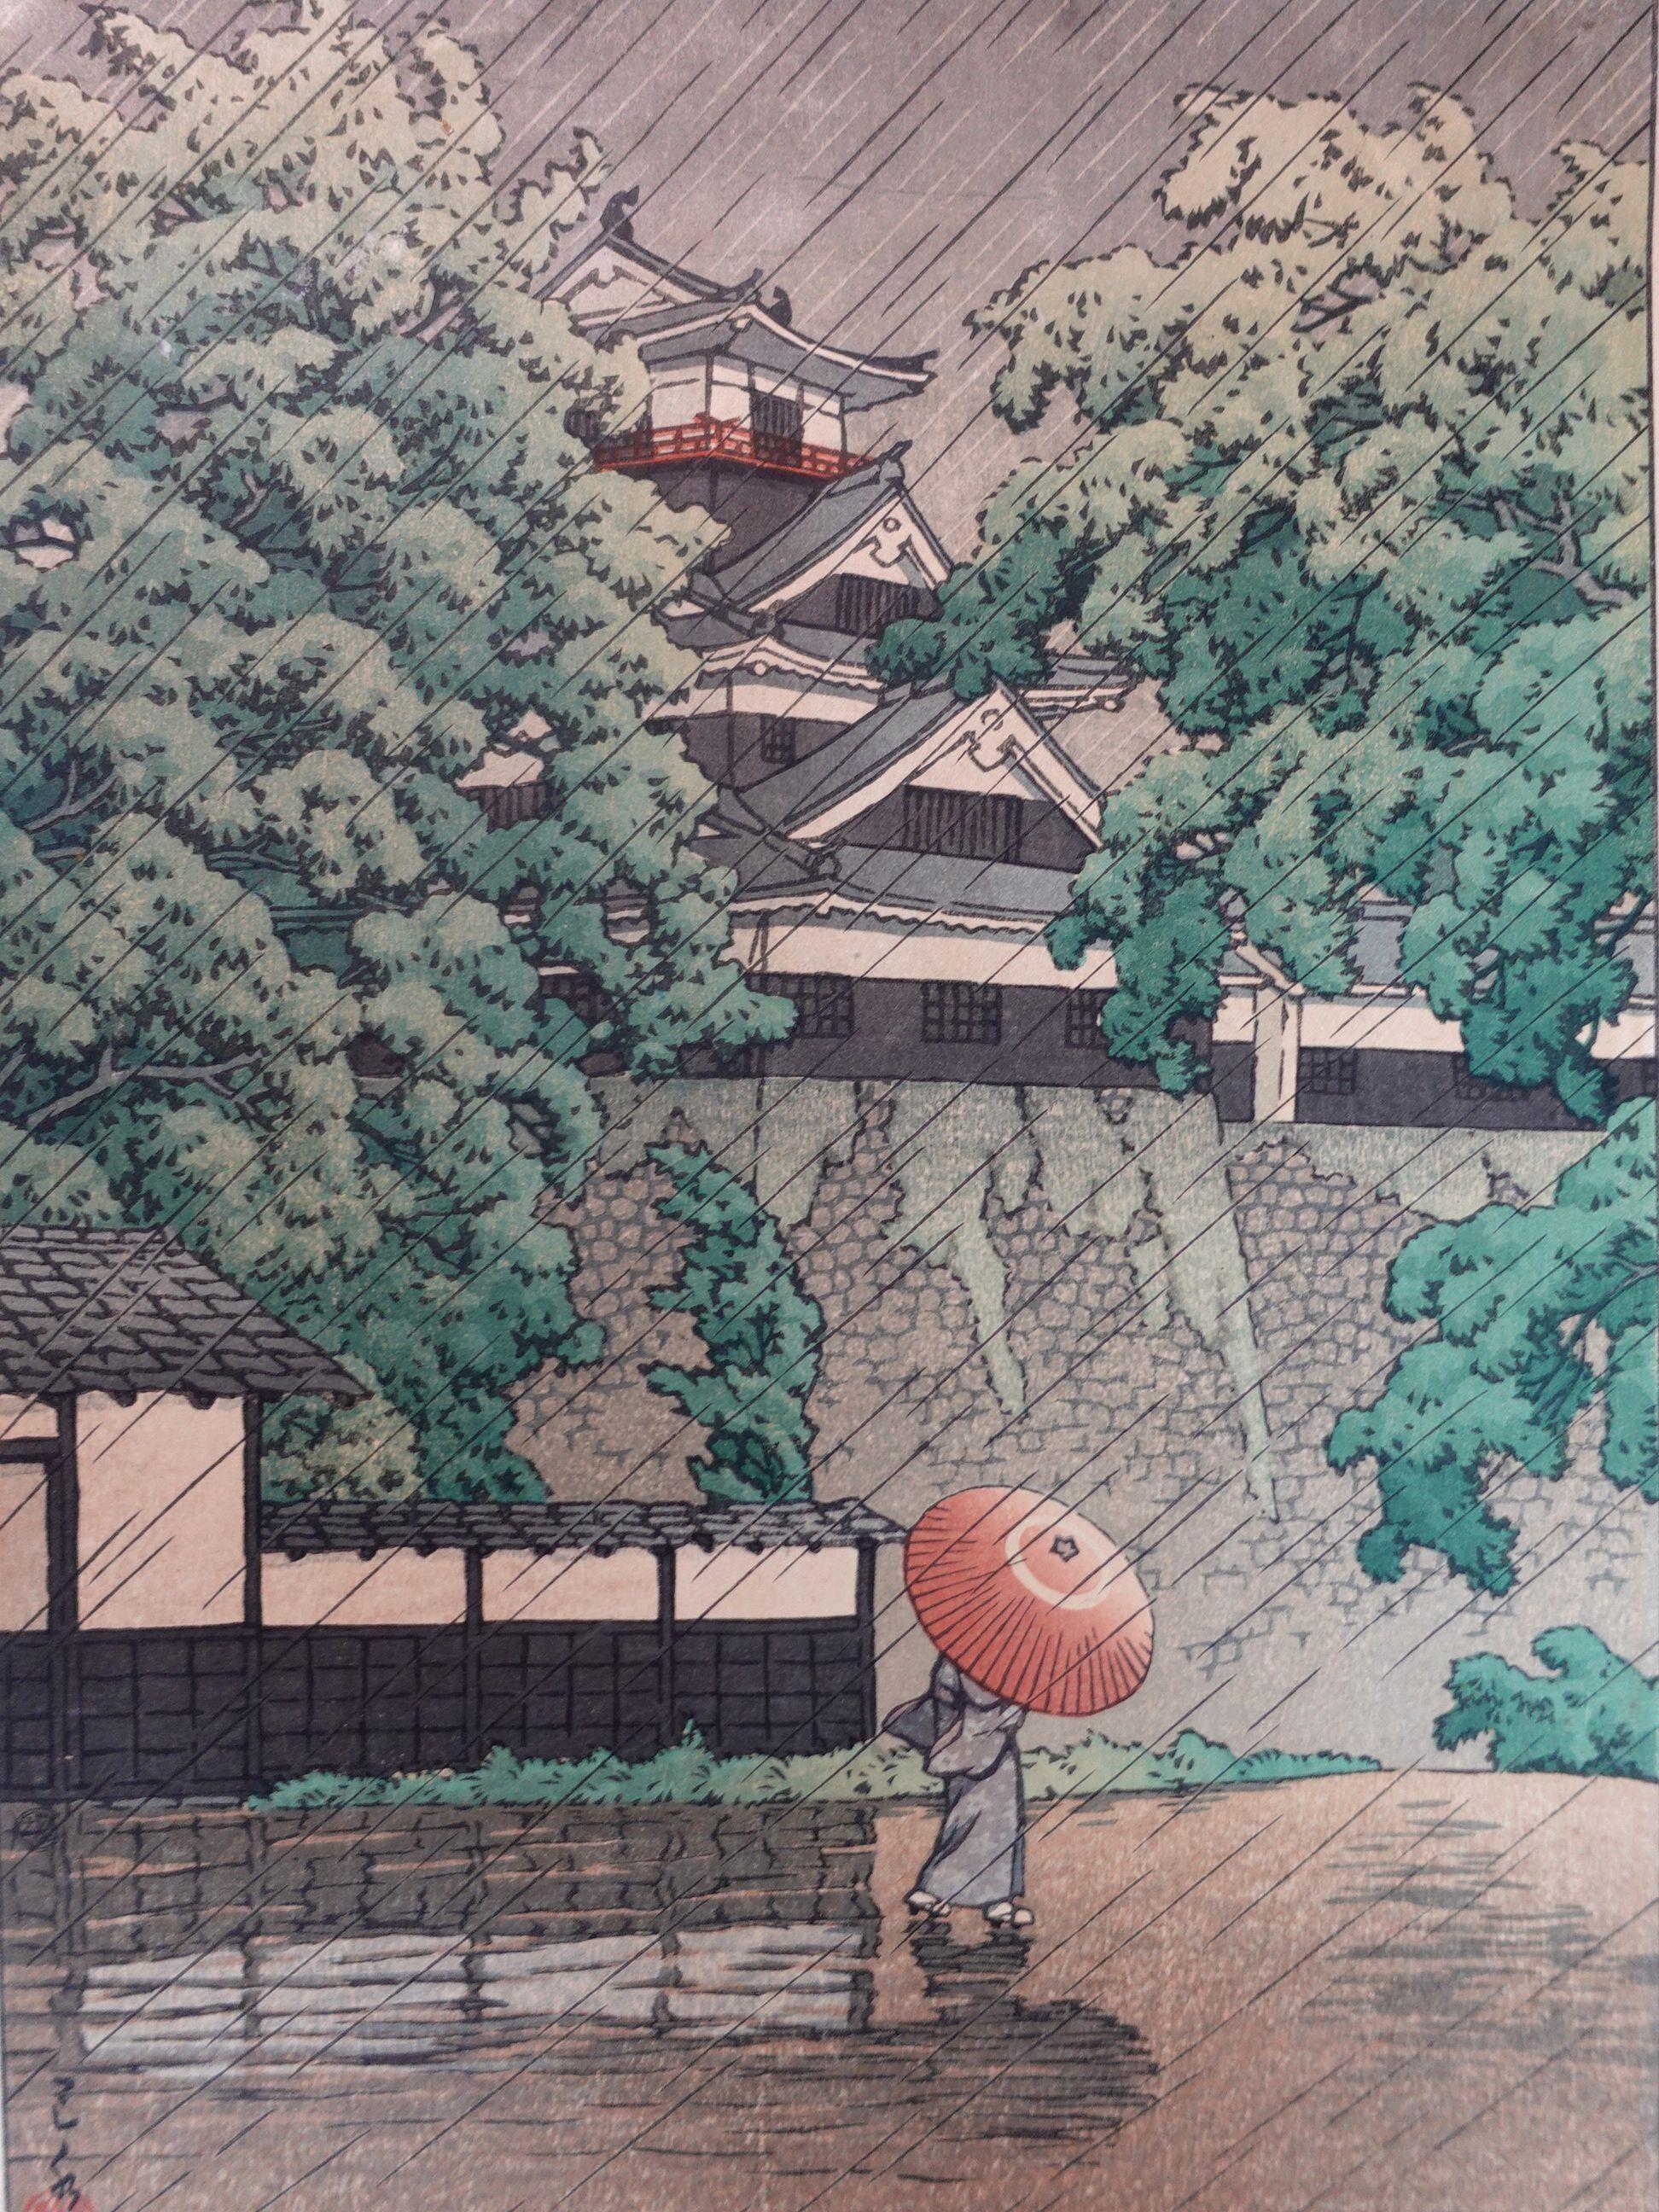 Hand-Carved Japanese Woodblock Print by Kawase Hasui, Published 1948